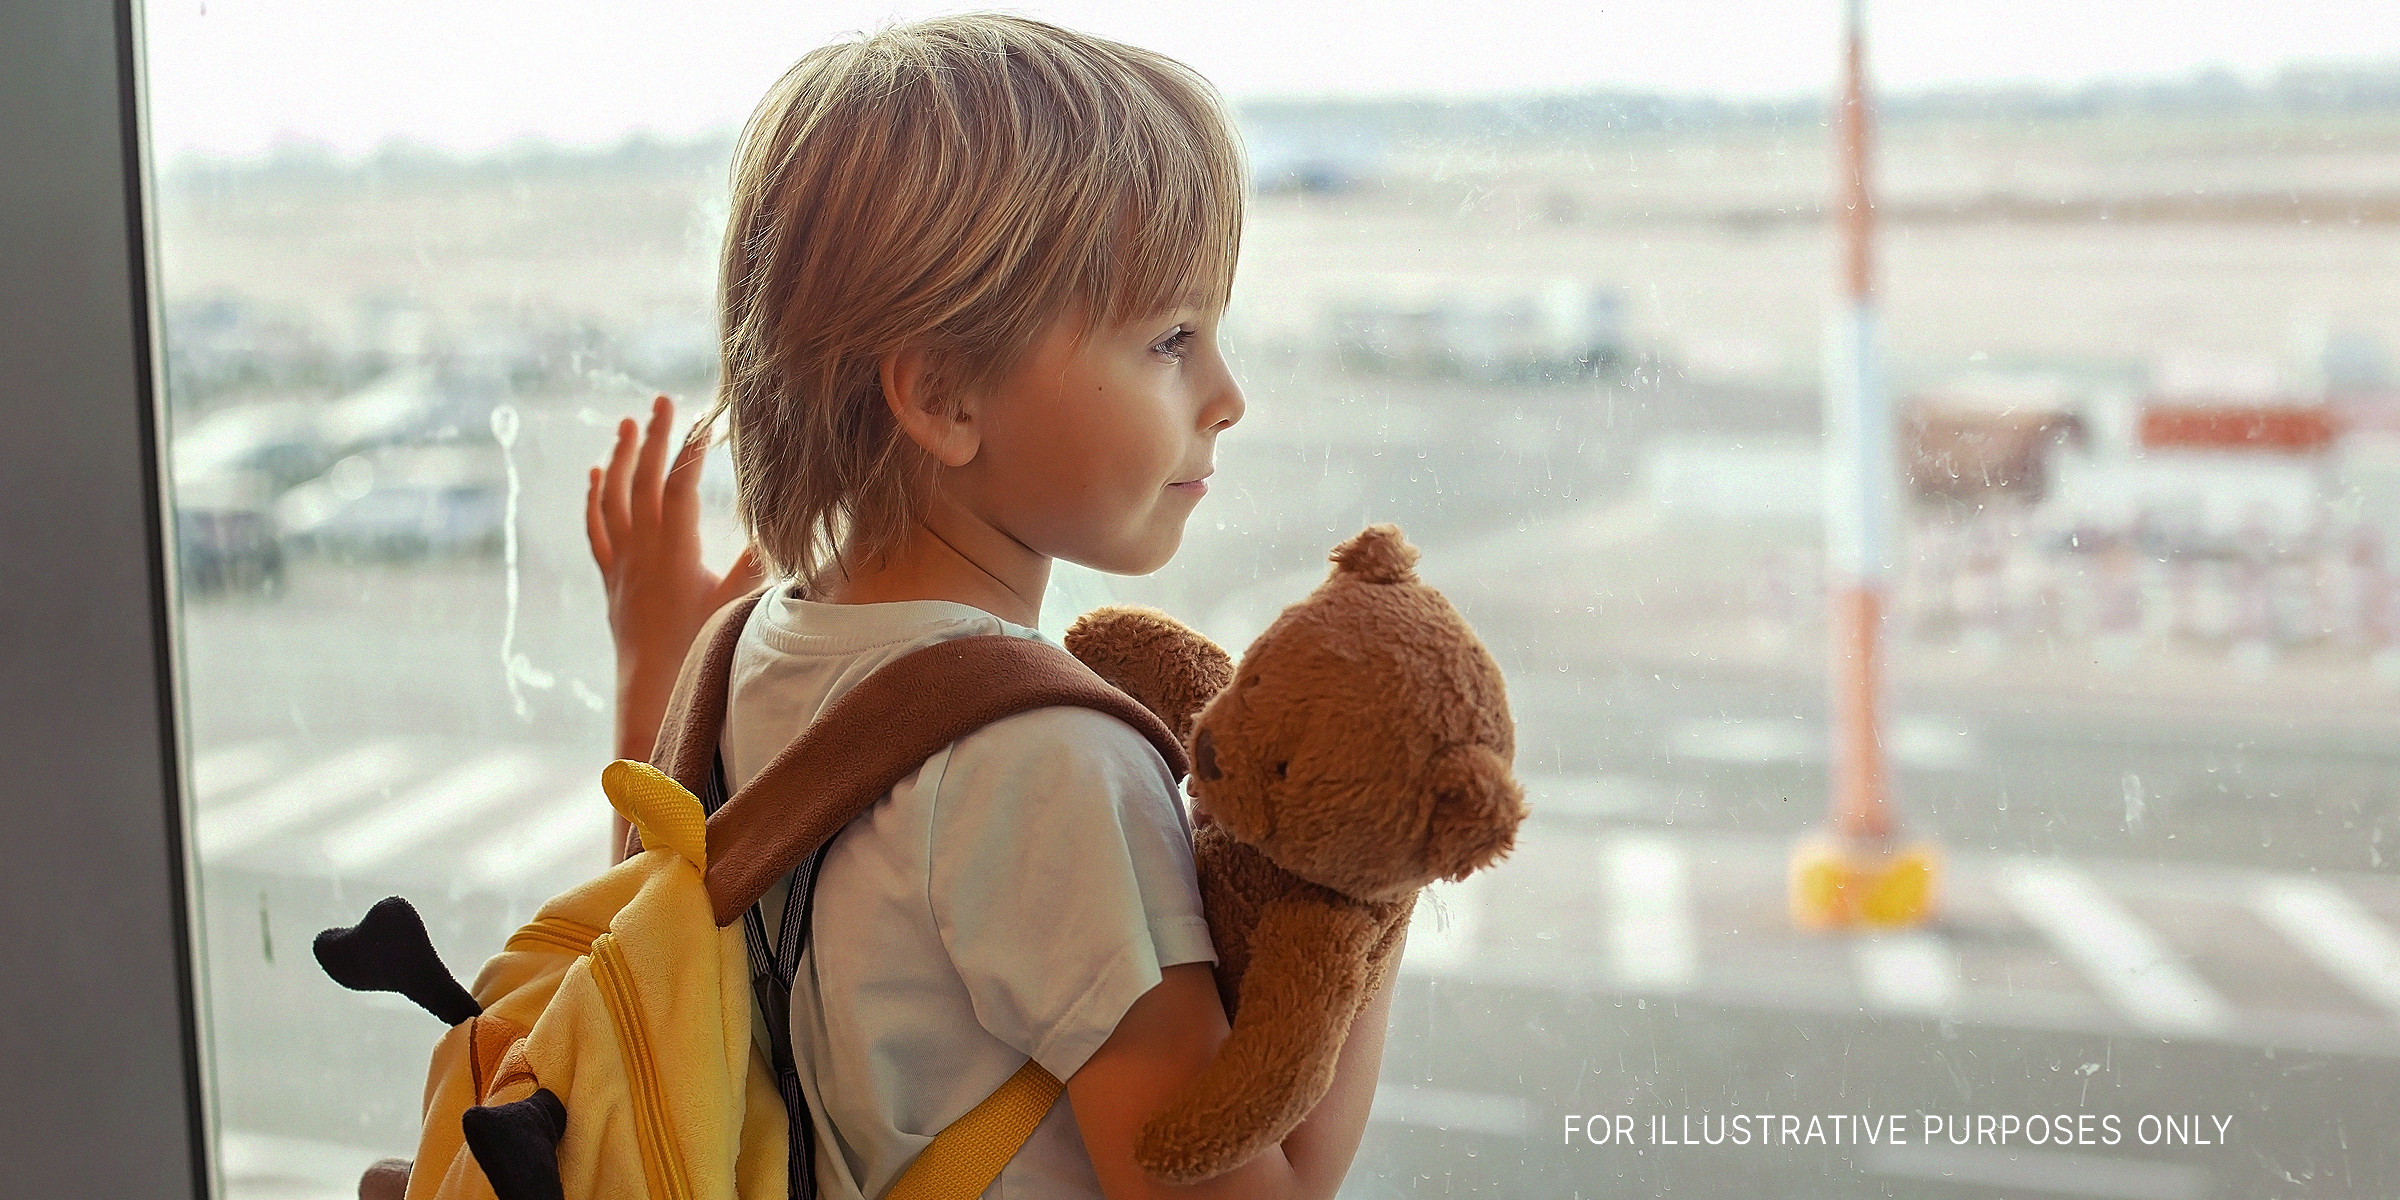 A little boy holding a stuffed animal while gazing out an airport window | Source: Getty Images